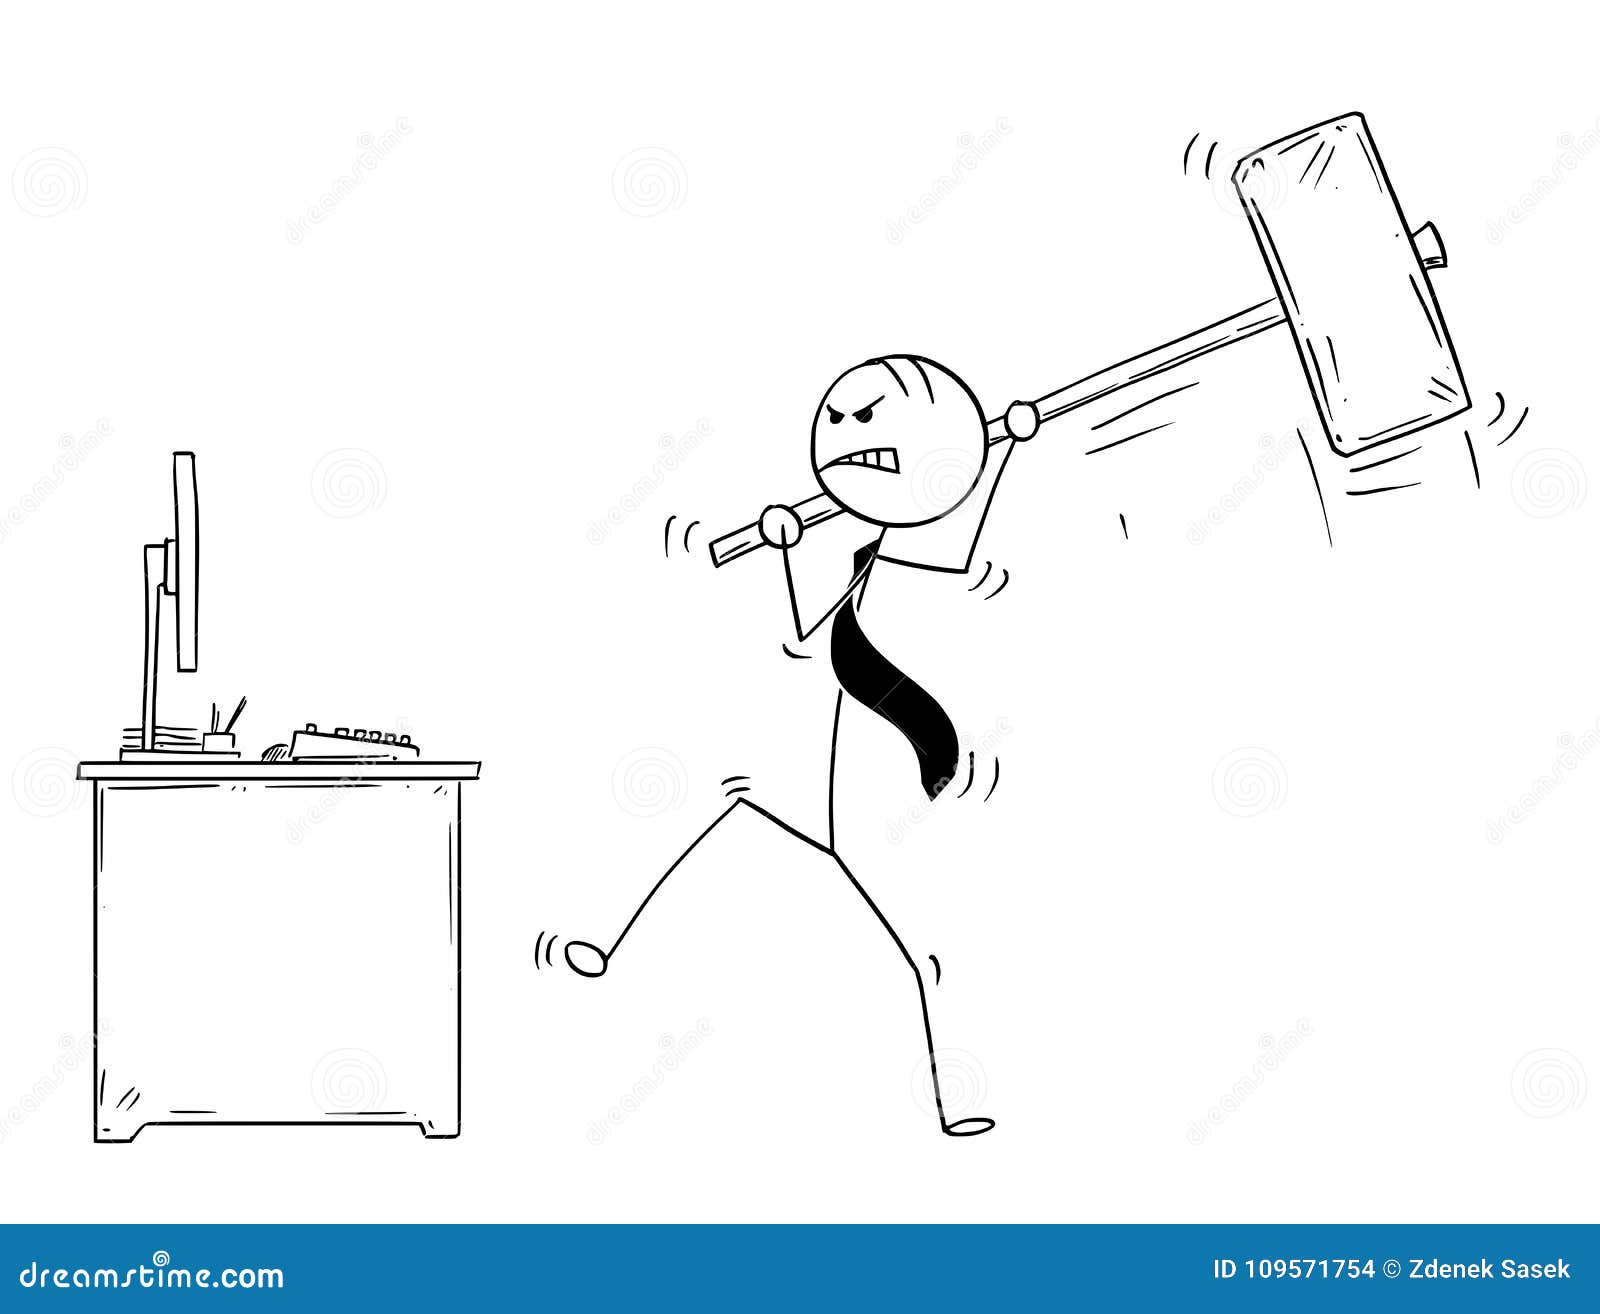 cartoon of angry businessman ready to destroy office computer by large sledgehammer or hammer